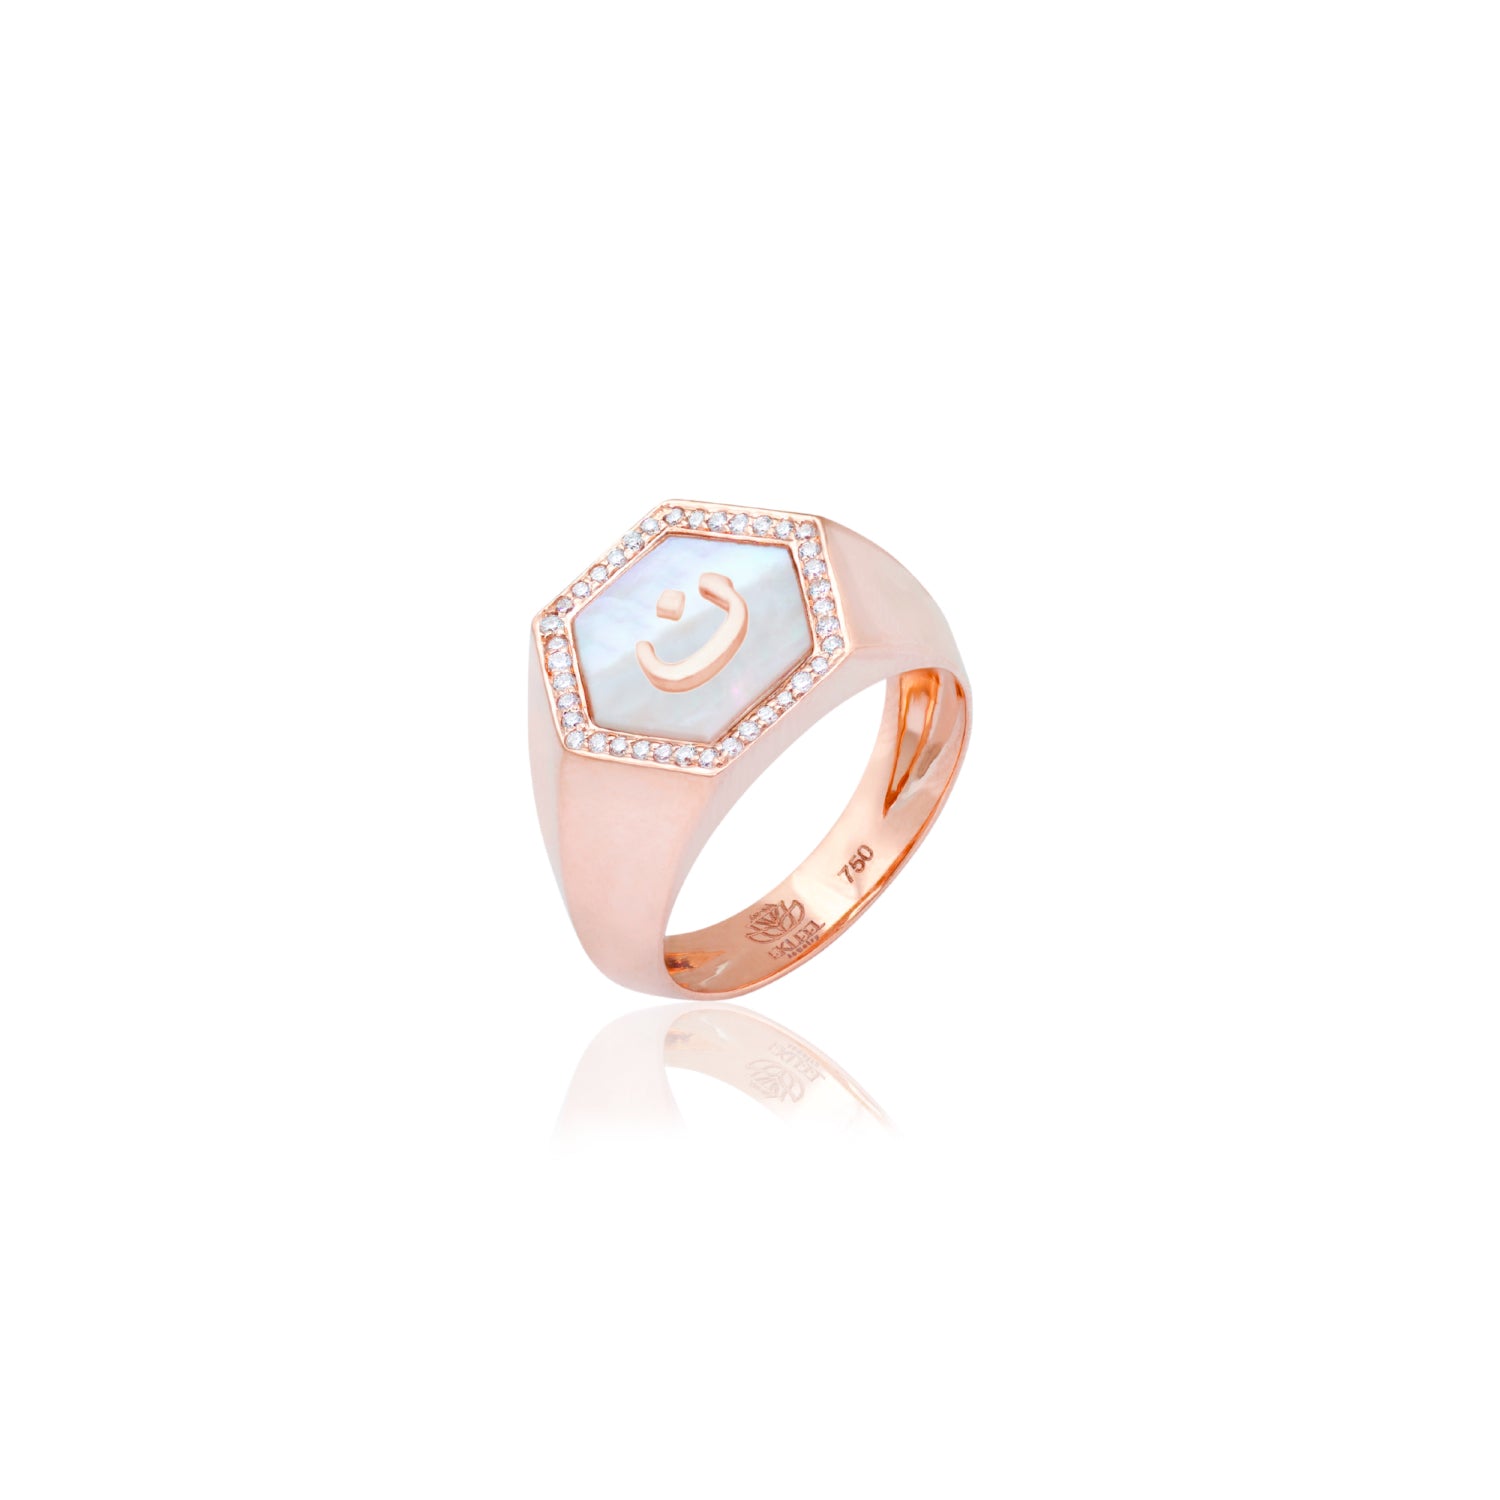 Qamoos 2.0 Letter ن White Mother of Pearl and Diamond Signet Ring in Rose Gold